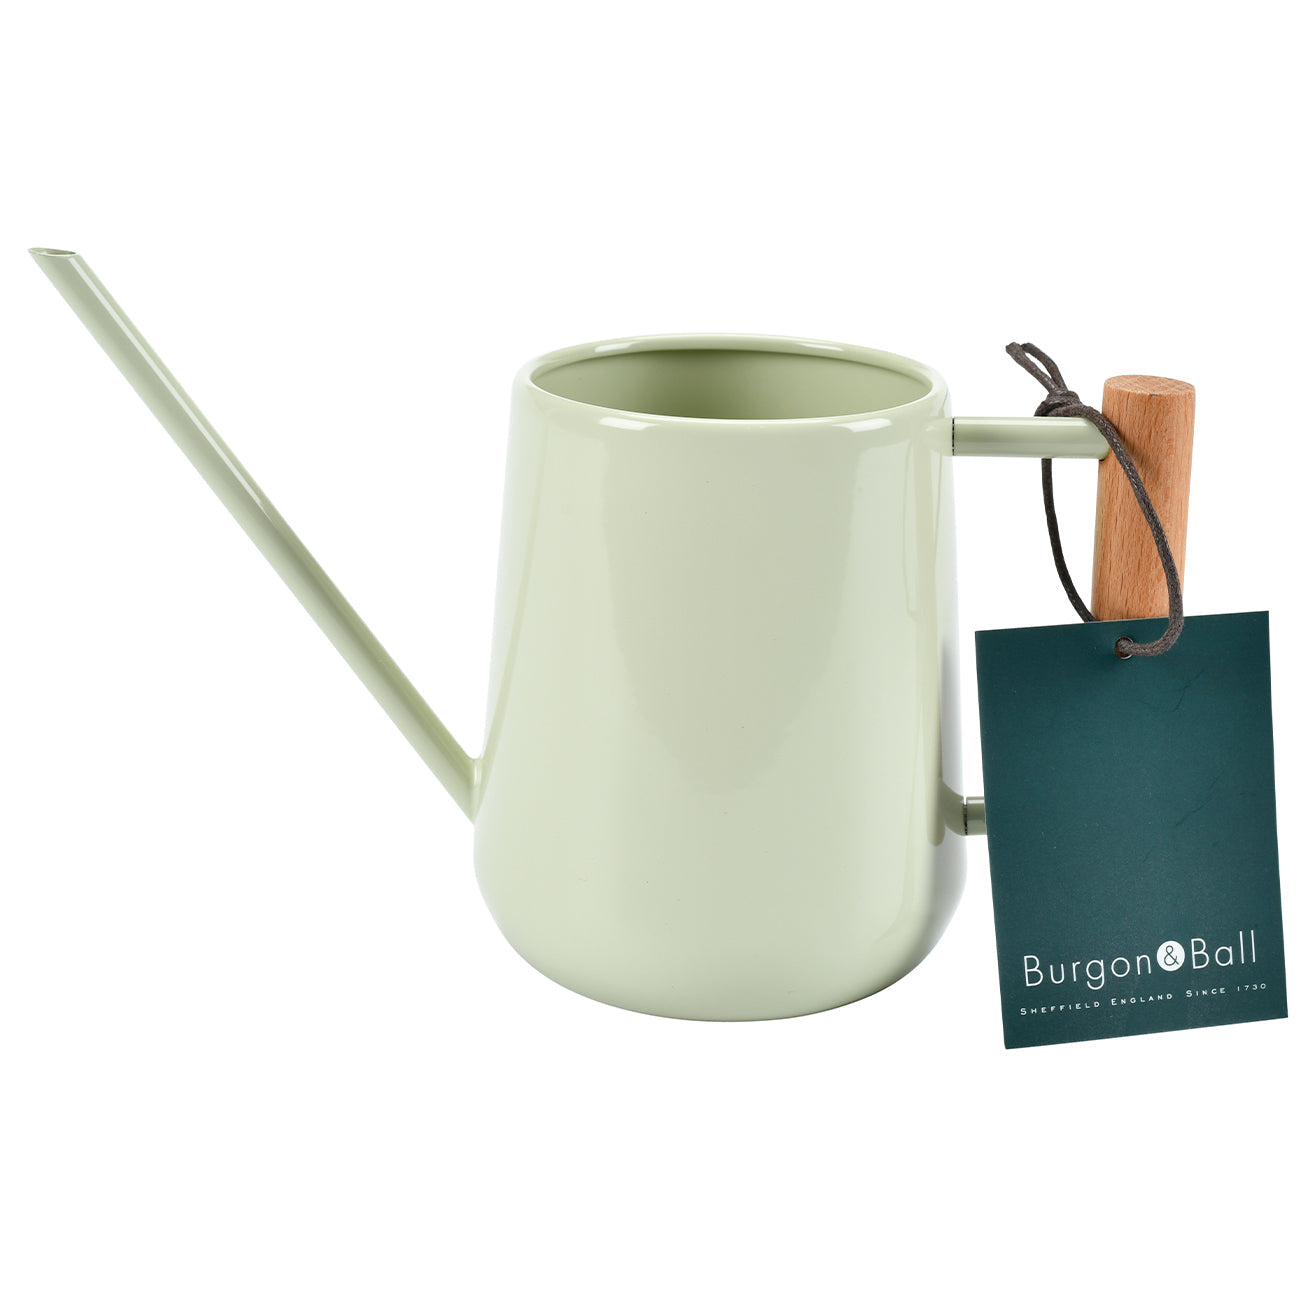 Burgon & Ball Small Indoor Watering Can in Pale Jade with product tag.